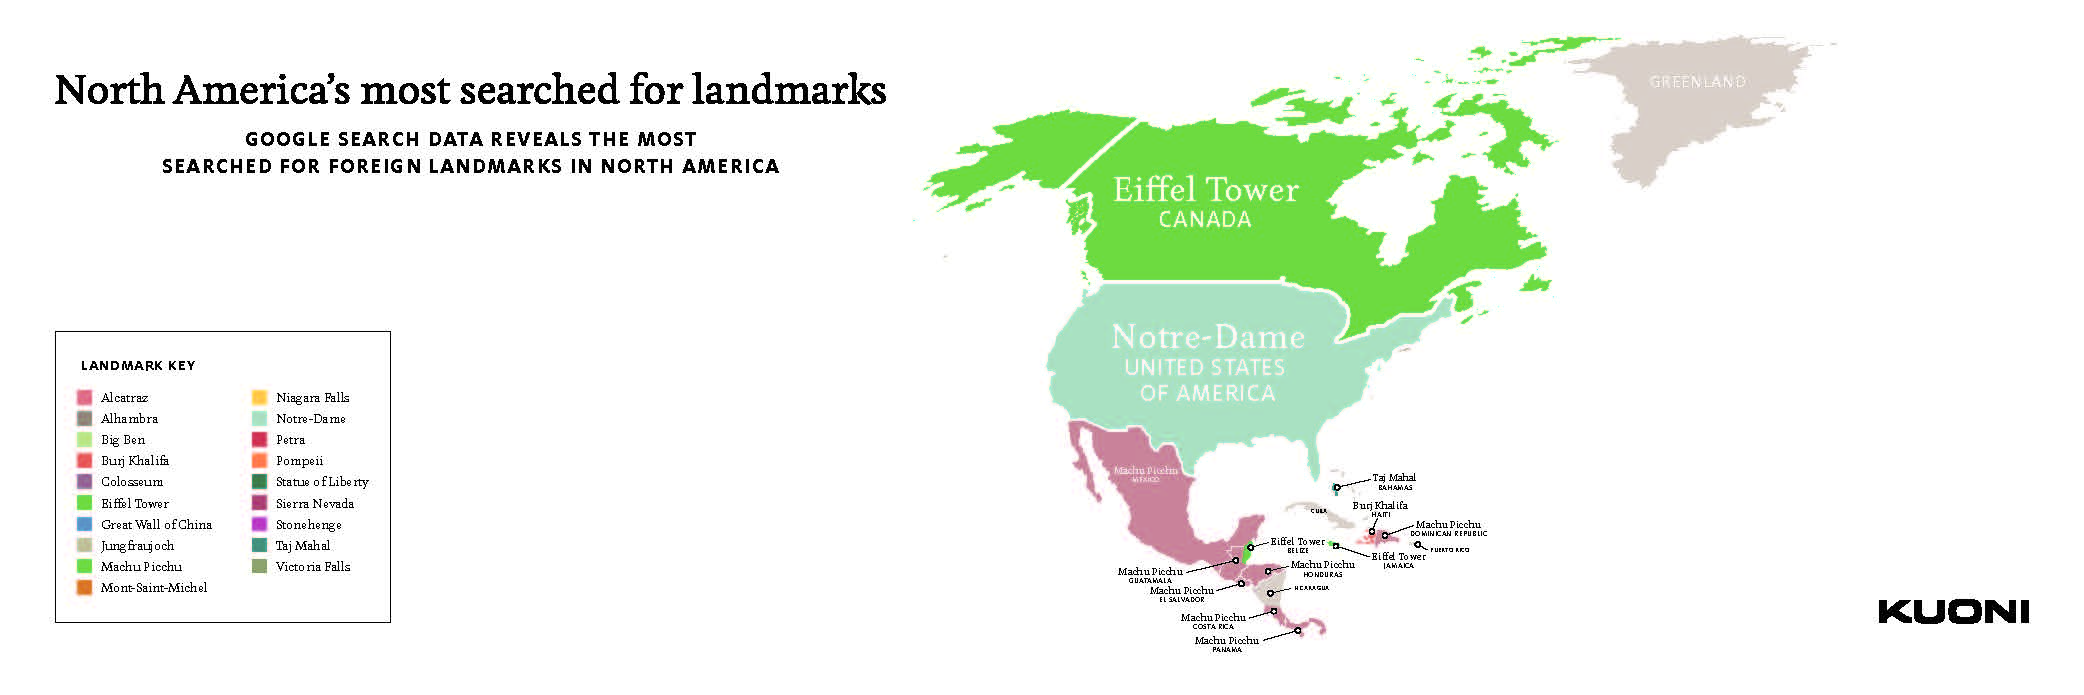 North America's Most Searched For Landmarks